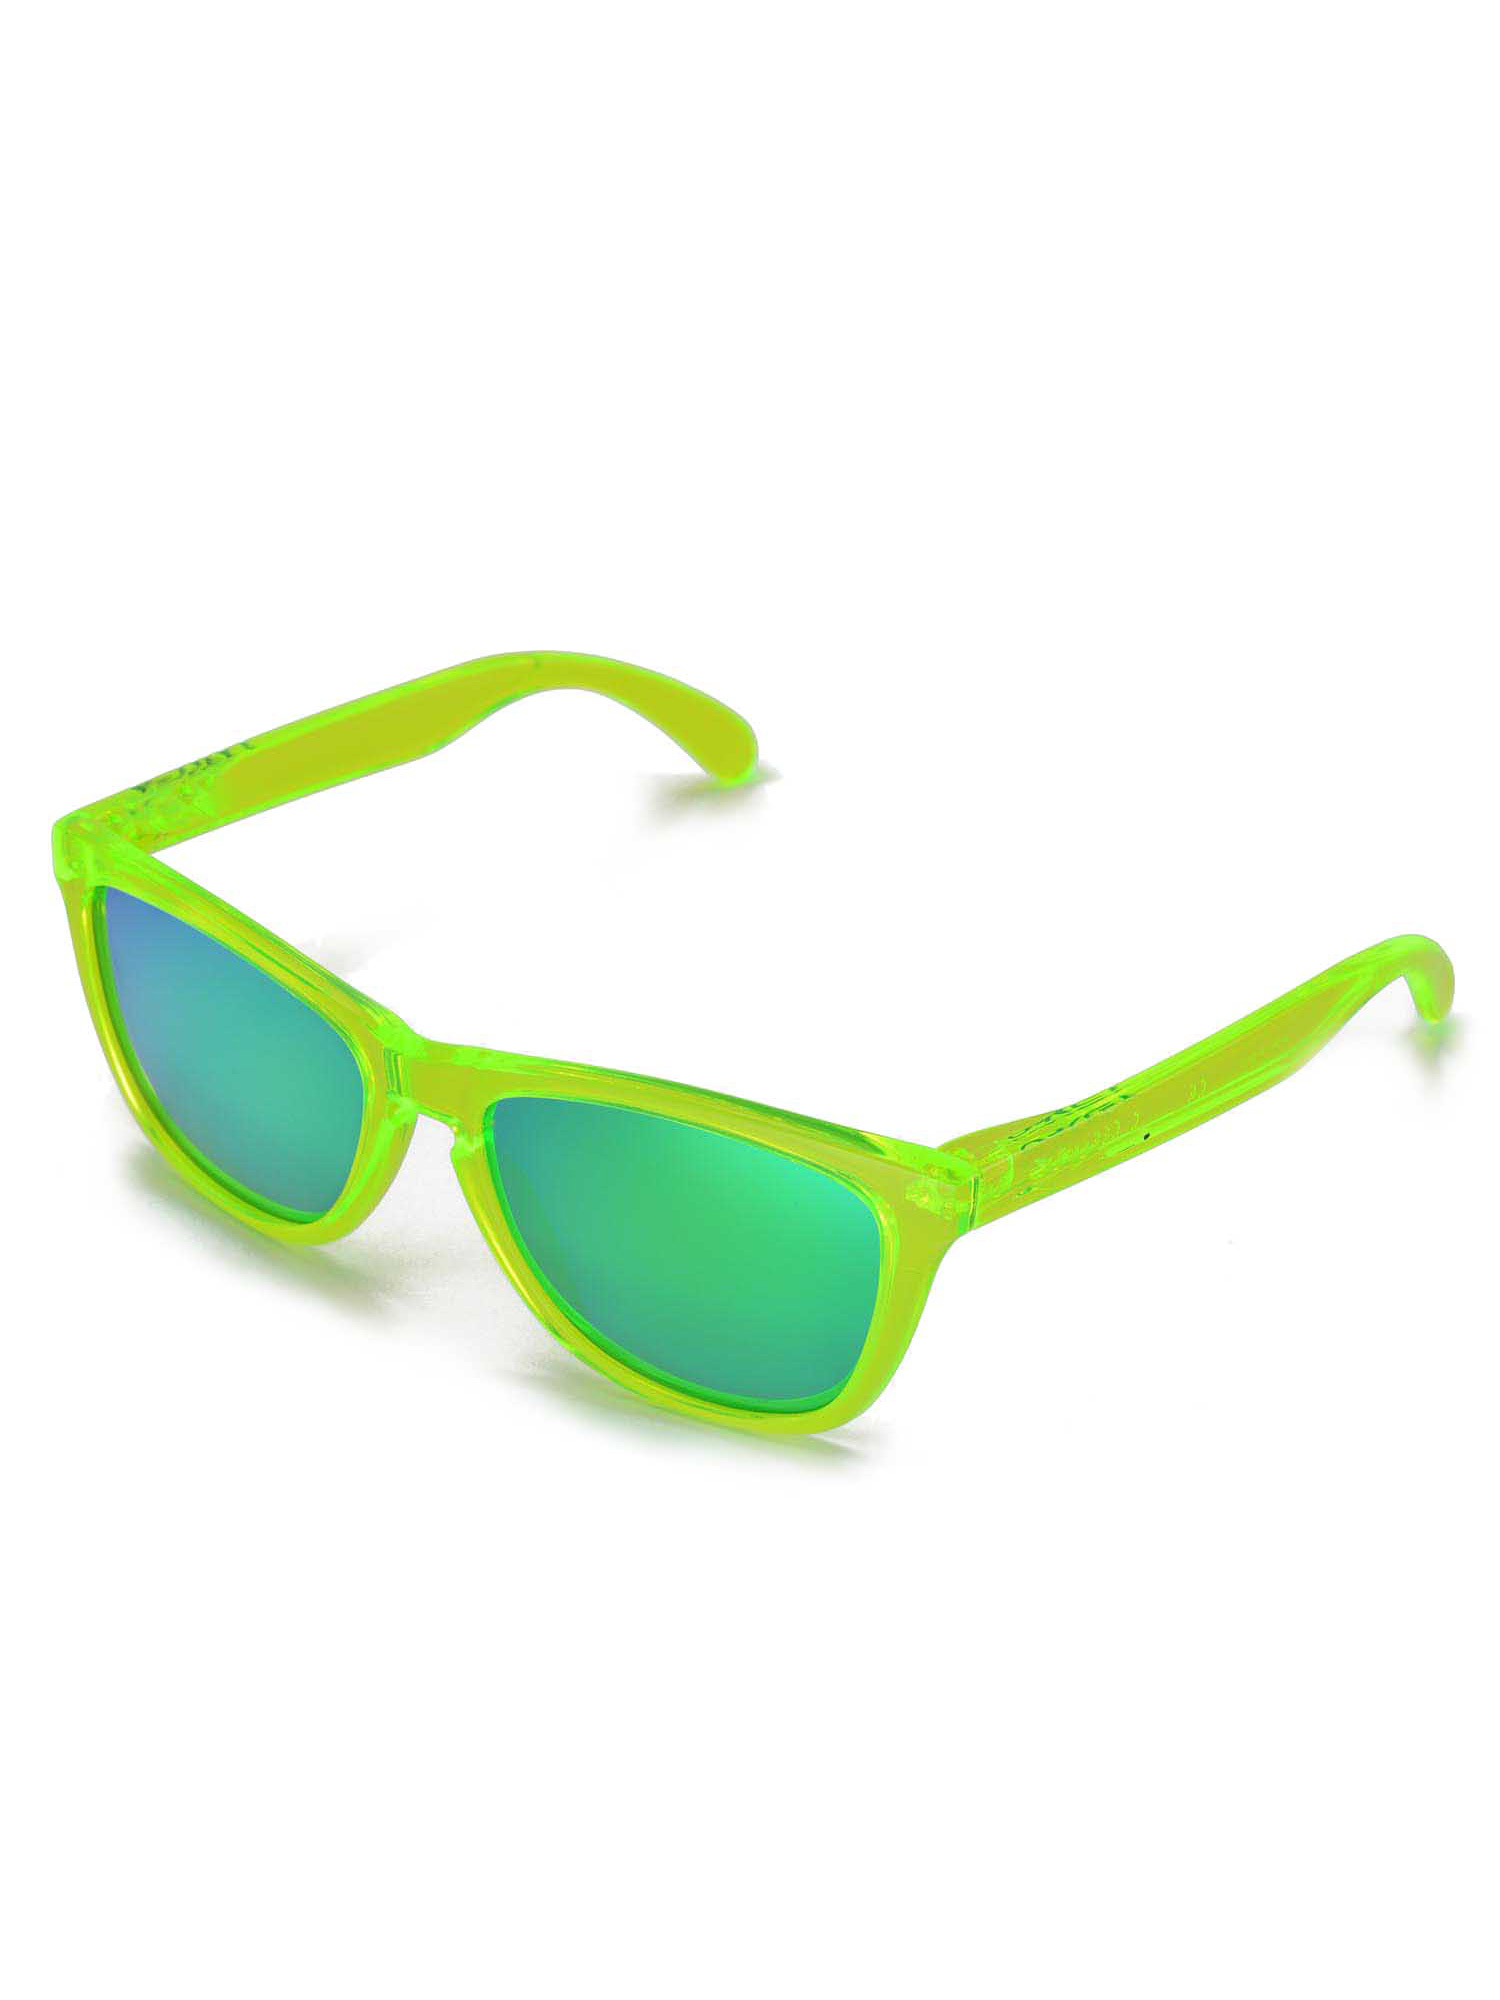 Walleva Emerald Polarized Replacement Lenses for Oakley Frogskins Sunglasses - image 4 of 6